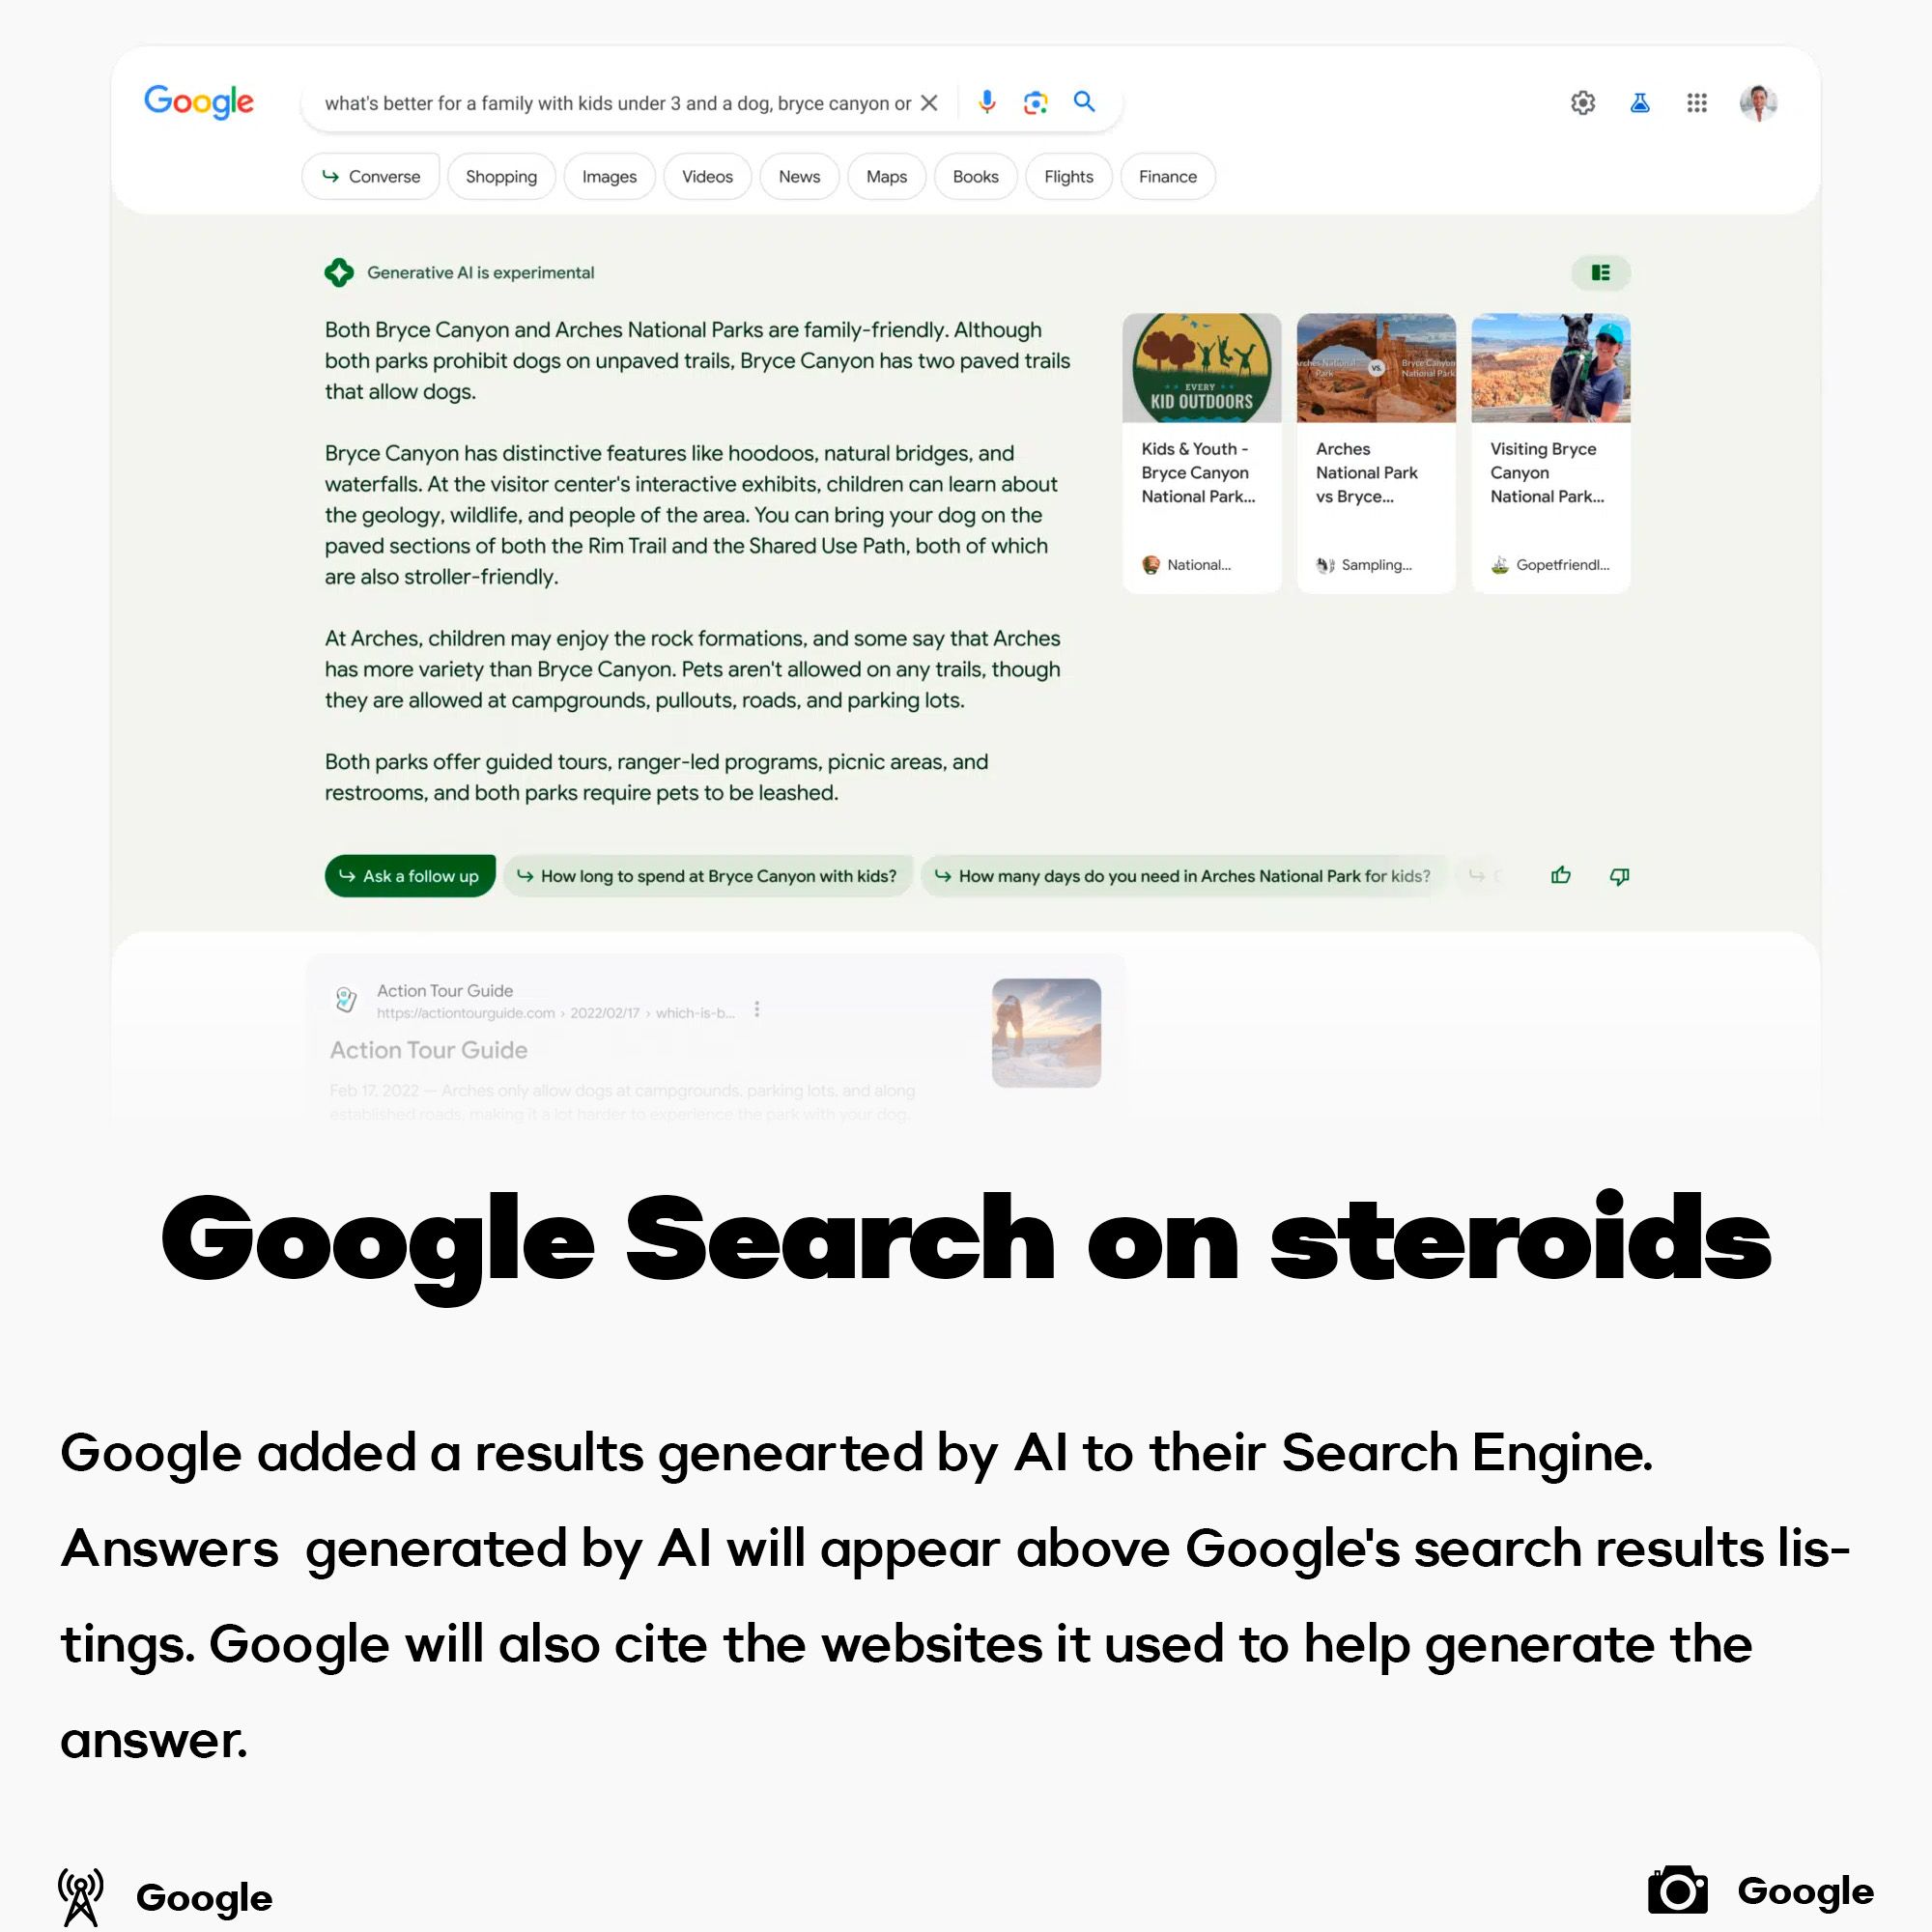 Google Search on Steroids